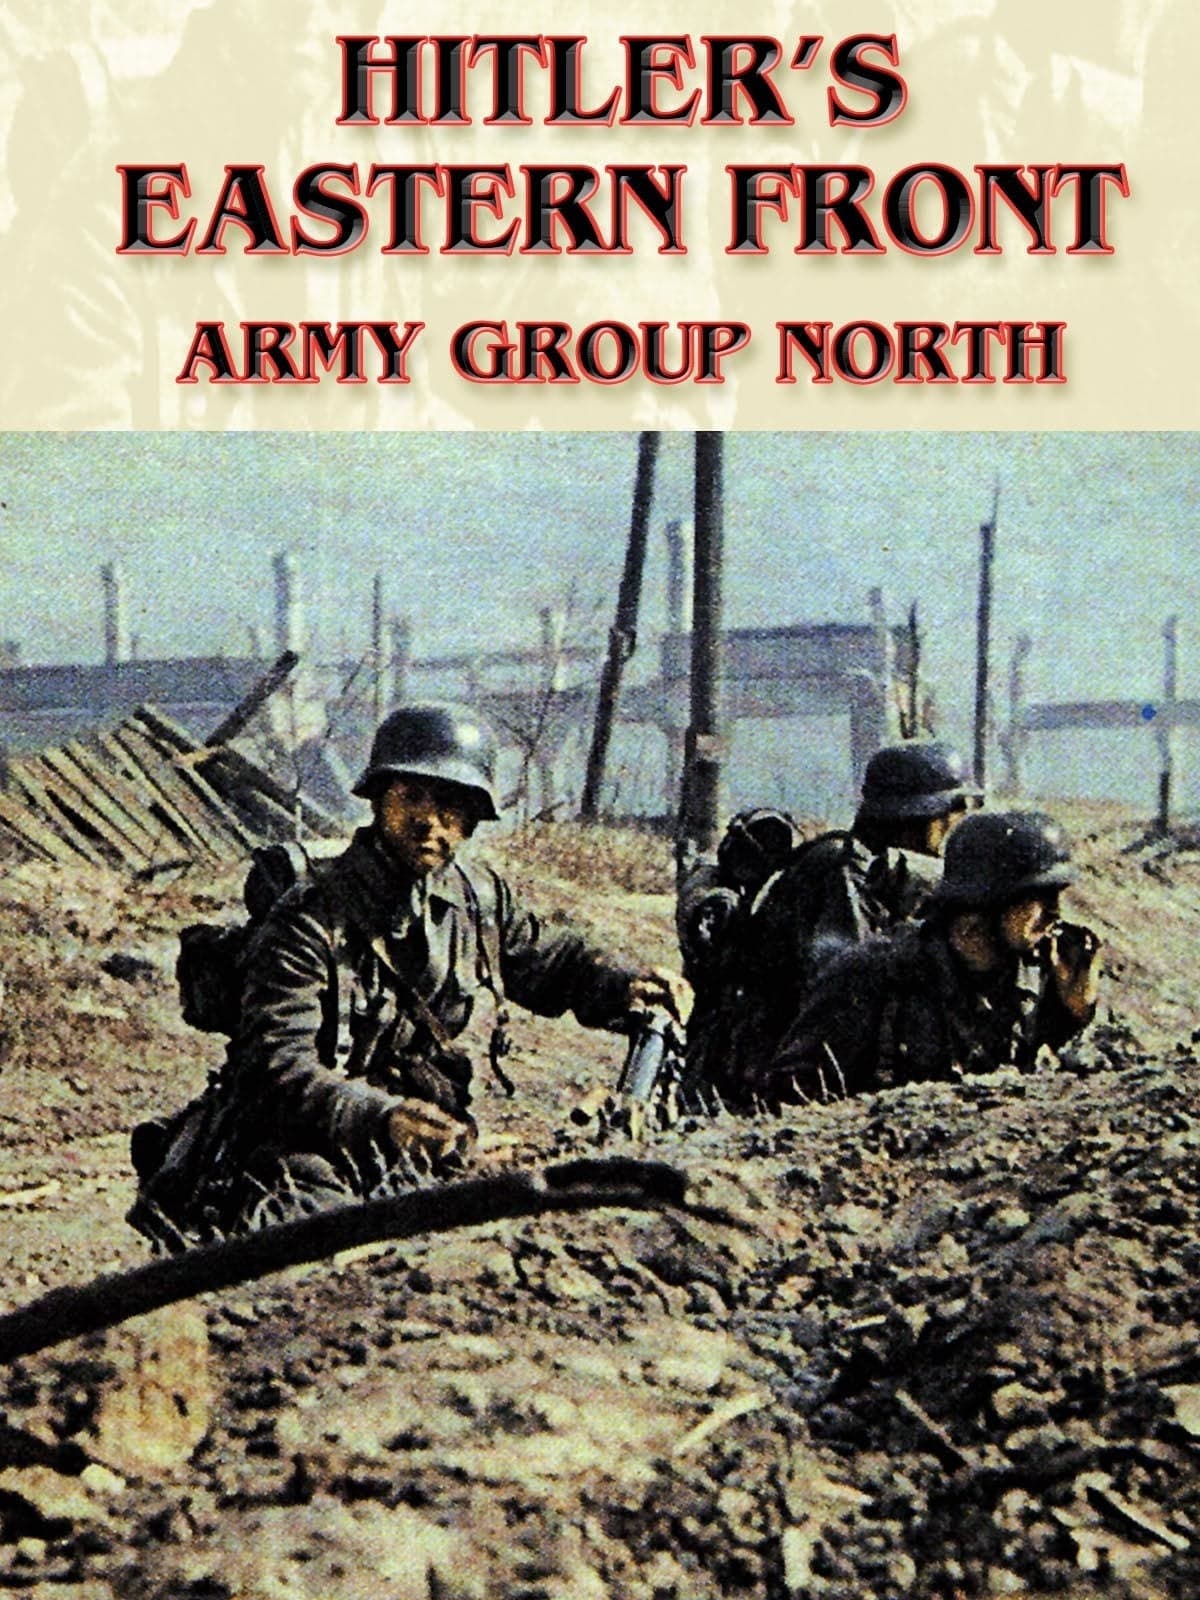 Hitler's Eastern Front: Army Group North